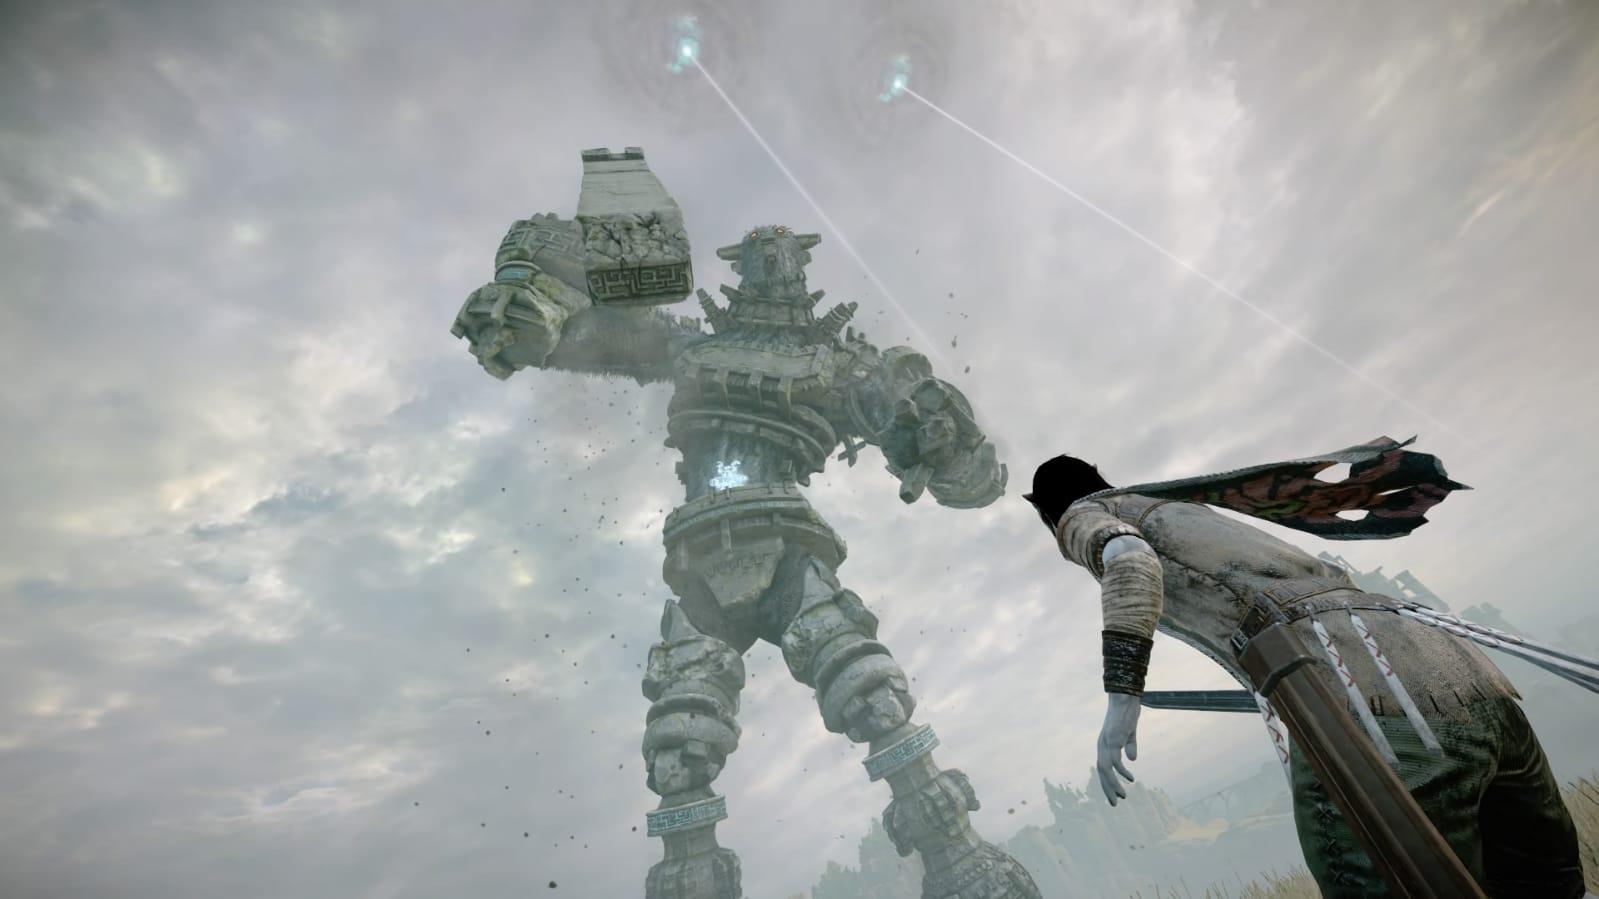 HD wallpaper, Sword, Video Game Characters, Shadow Of The Colossus, Gaius, Wander, Battle, Colossus, Video Games, Giant